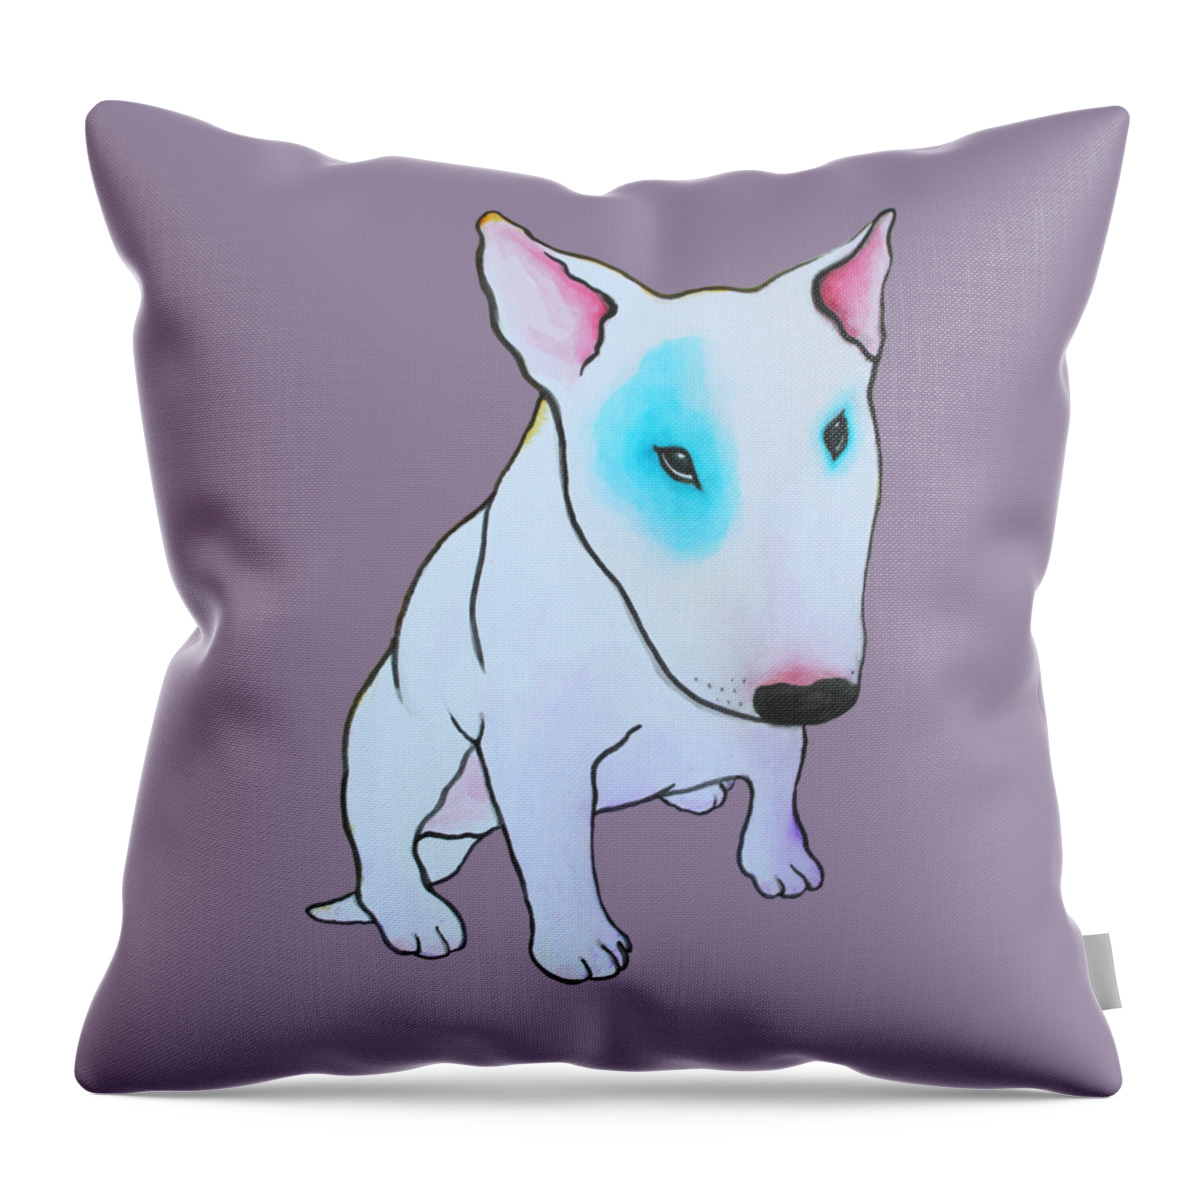 Noewi Throw Pillow featuring the painting Mischievous by Jindra Noewi